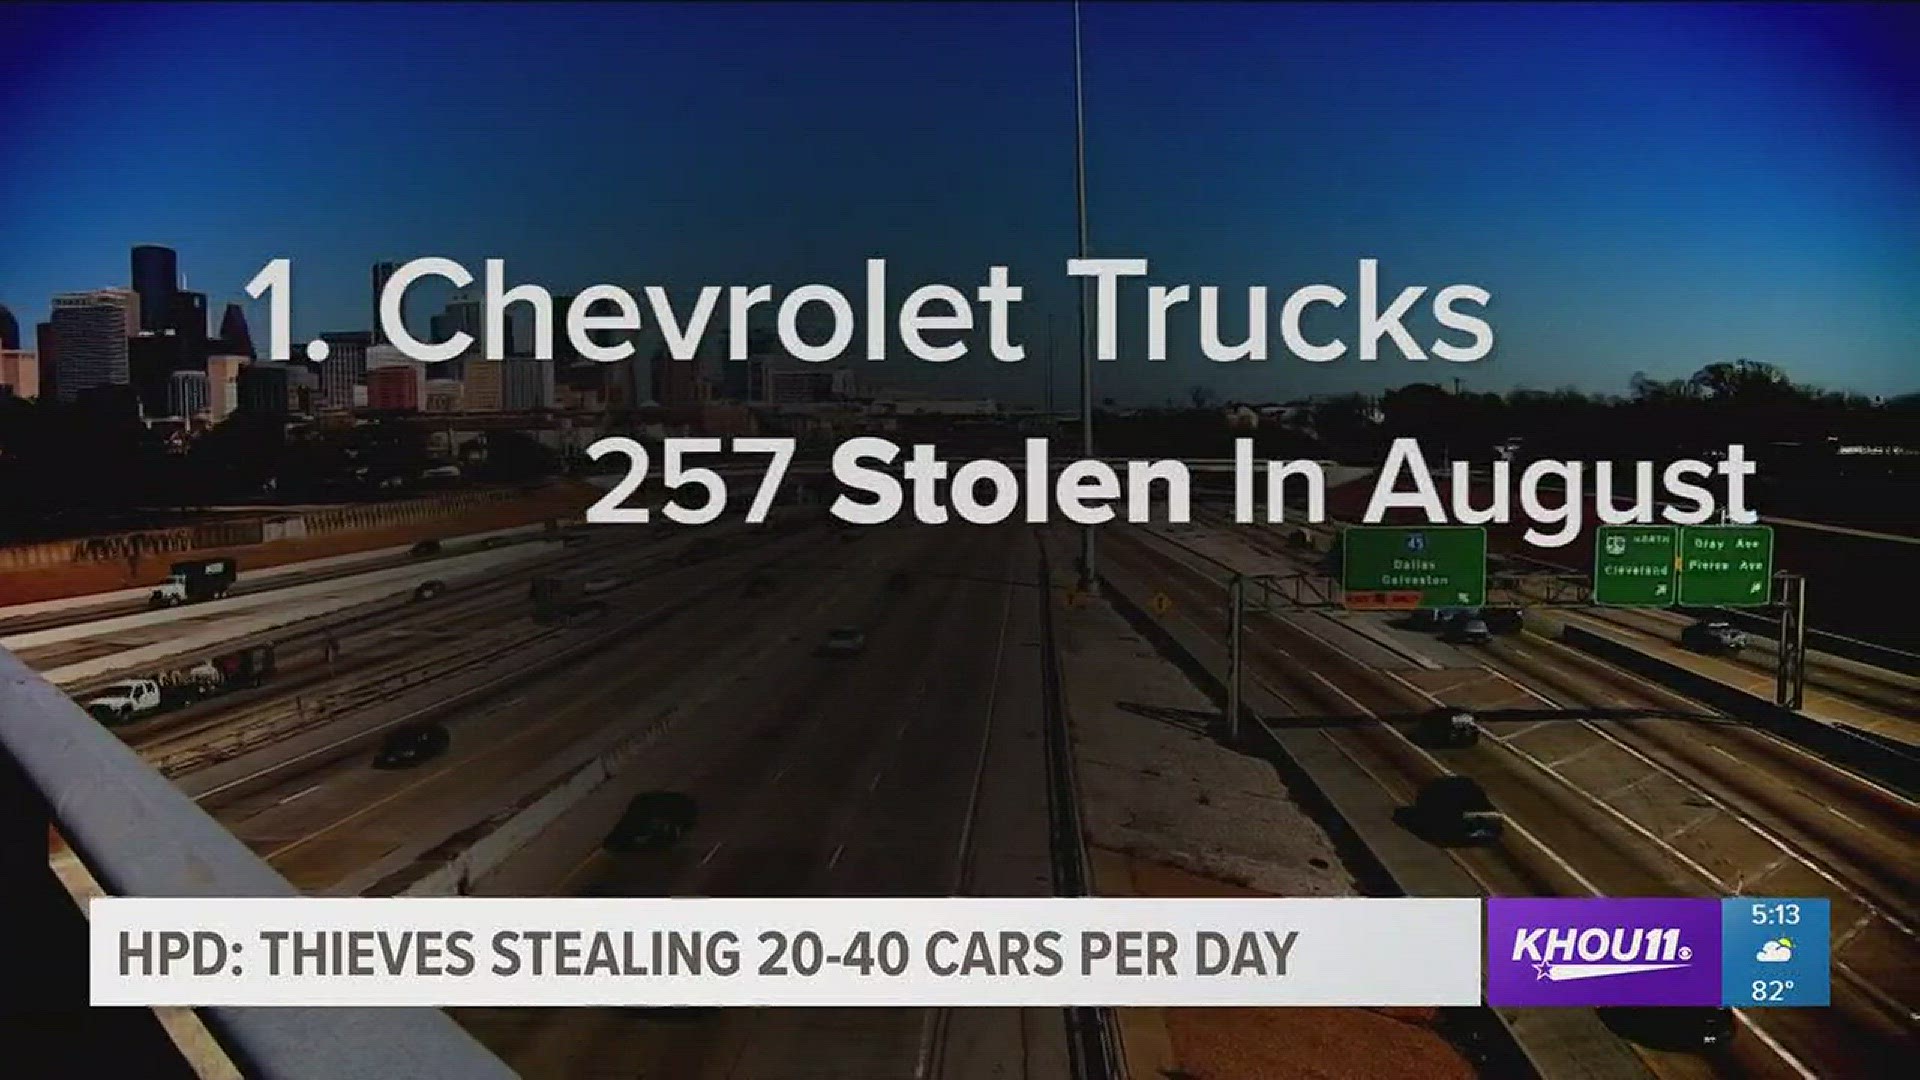 Thieves in Houston are stealing between 20 and 40 cars per day, and they're targeting two types of vehicles more than any others.